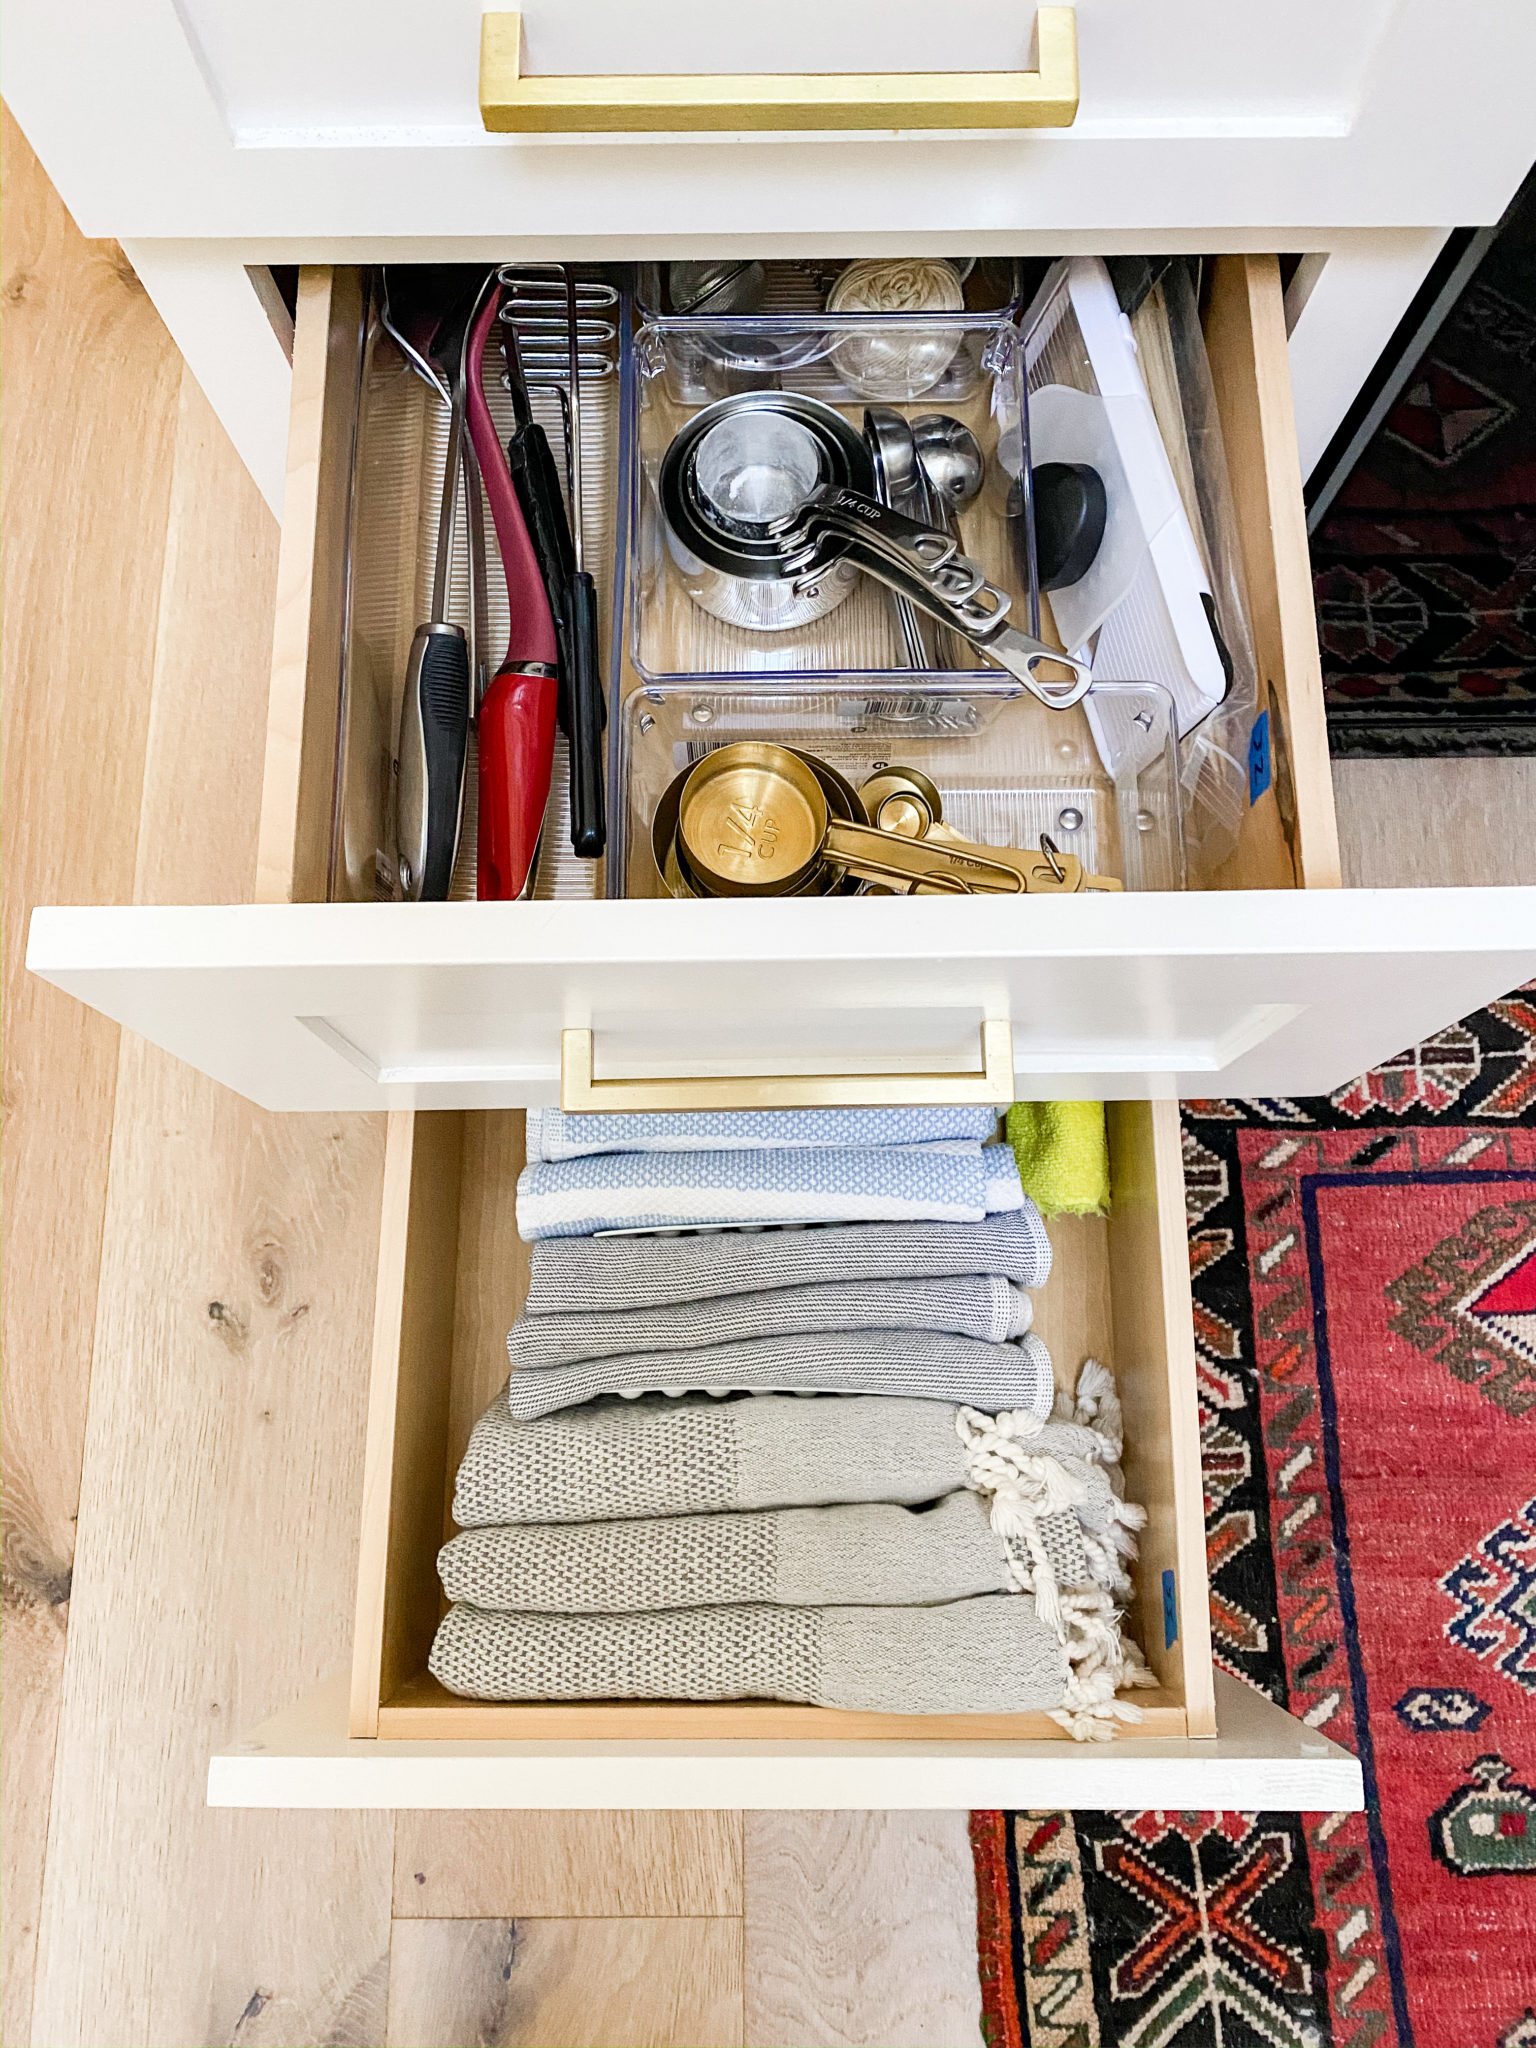 Tips to Organize Kitchen Cabinets and Drawers